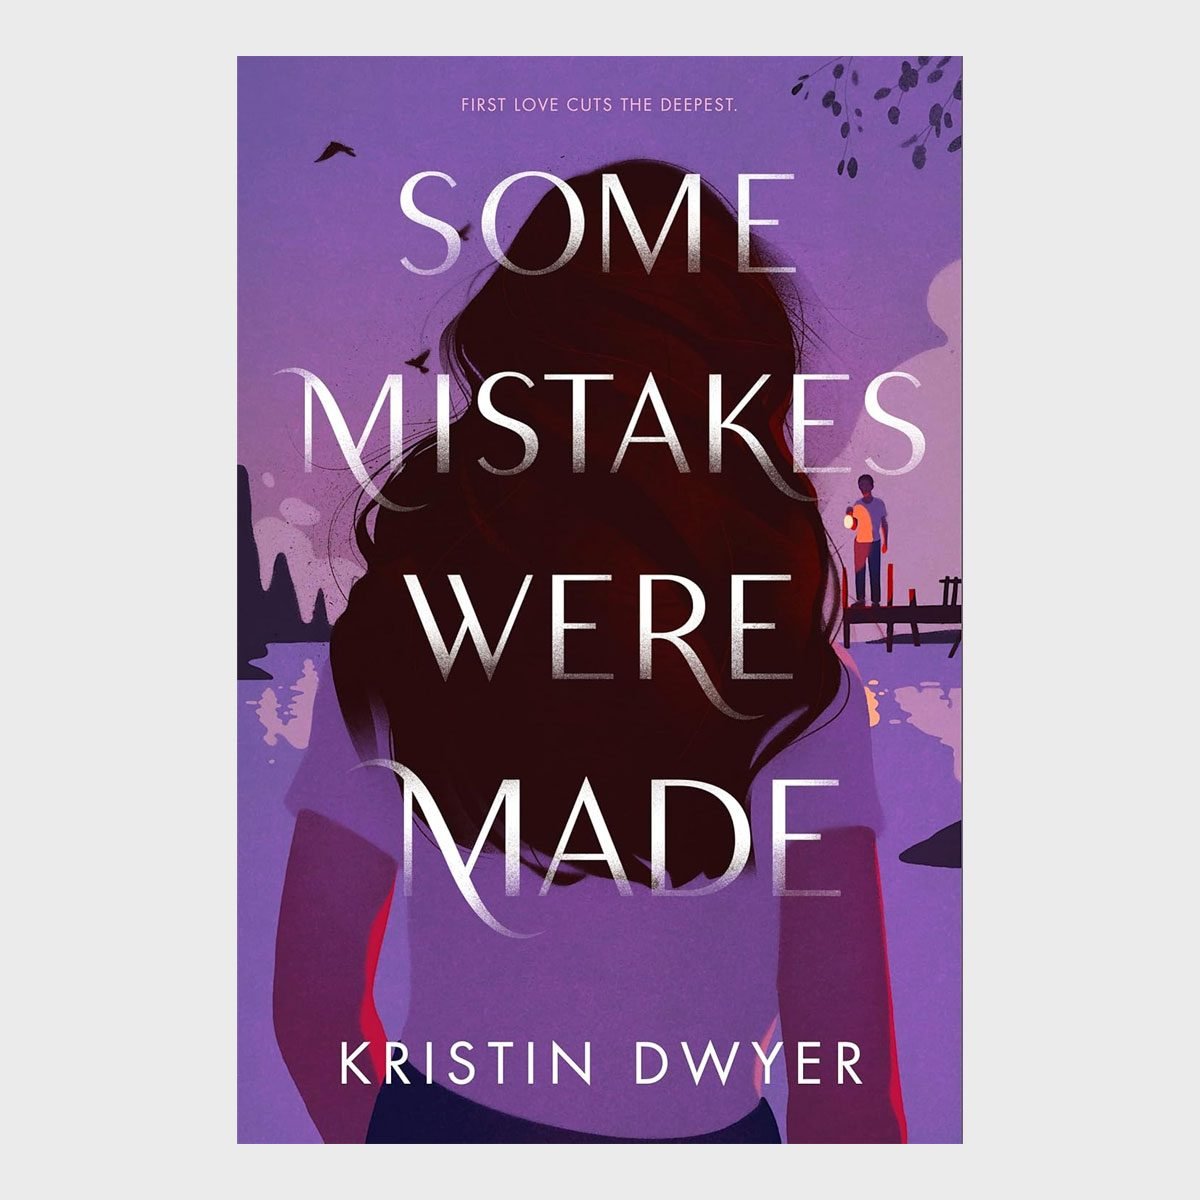 Some Mistakes Were Made By Kristin Dwyer